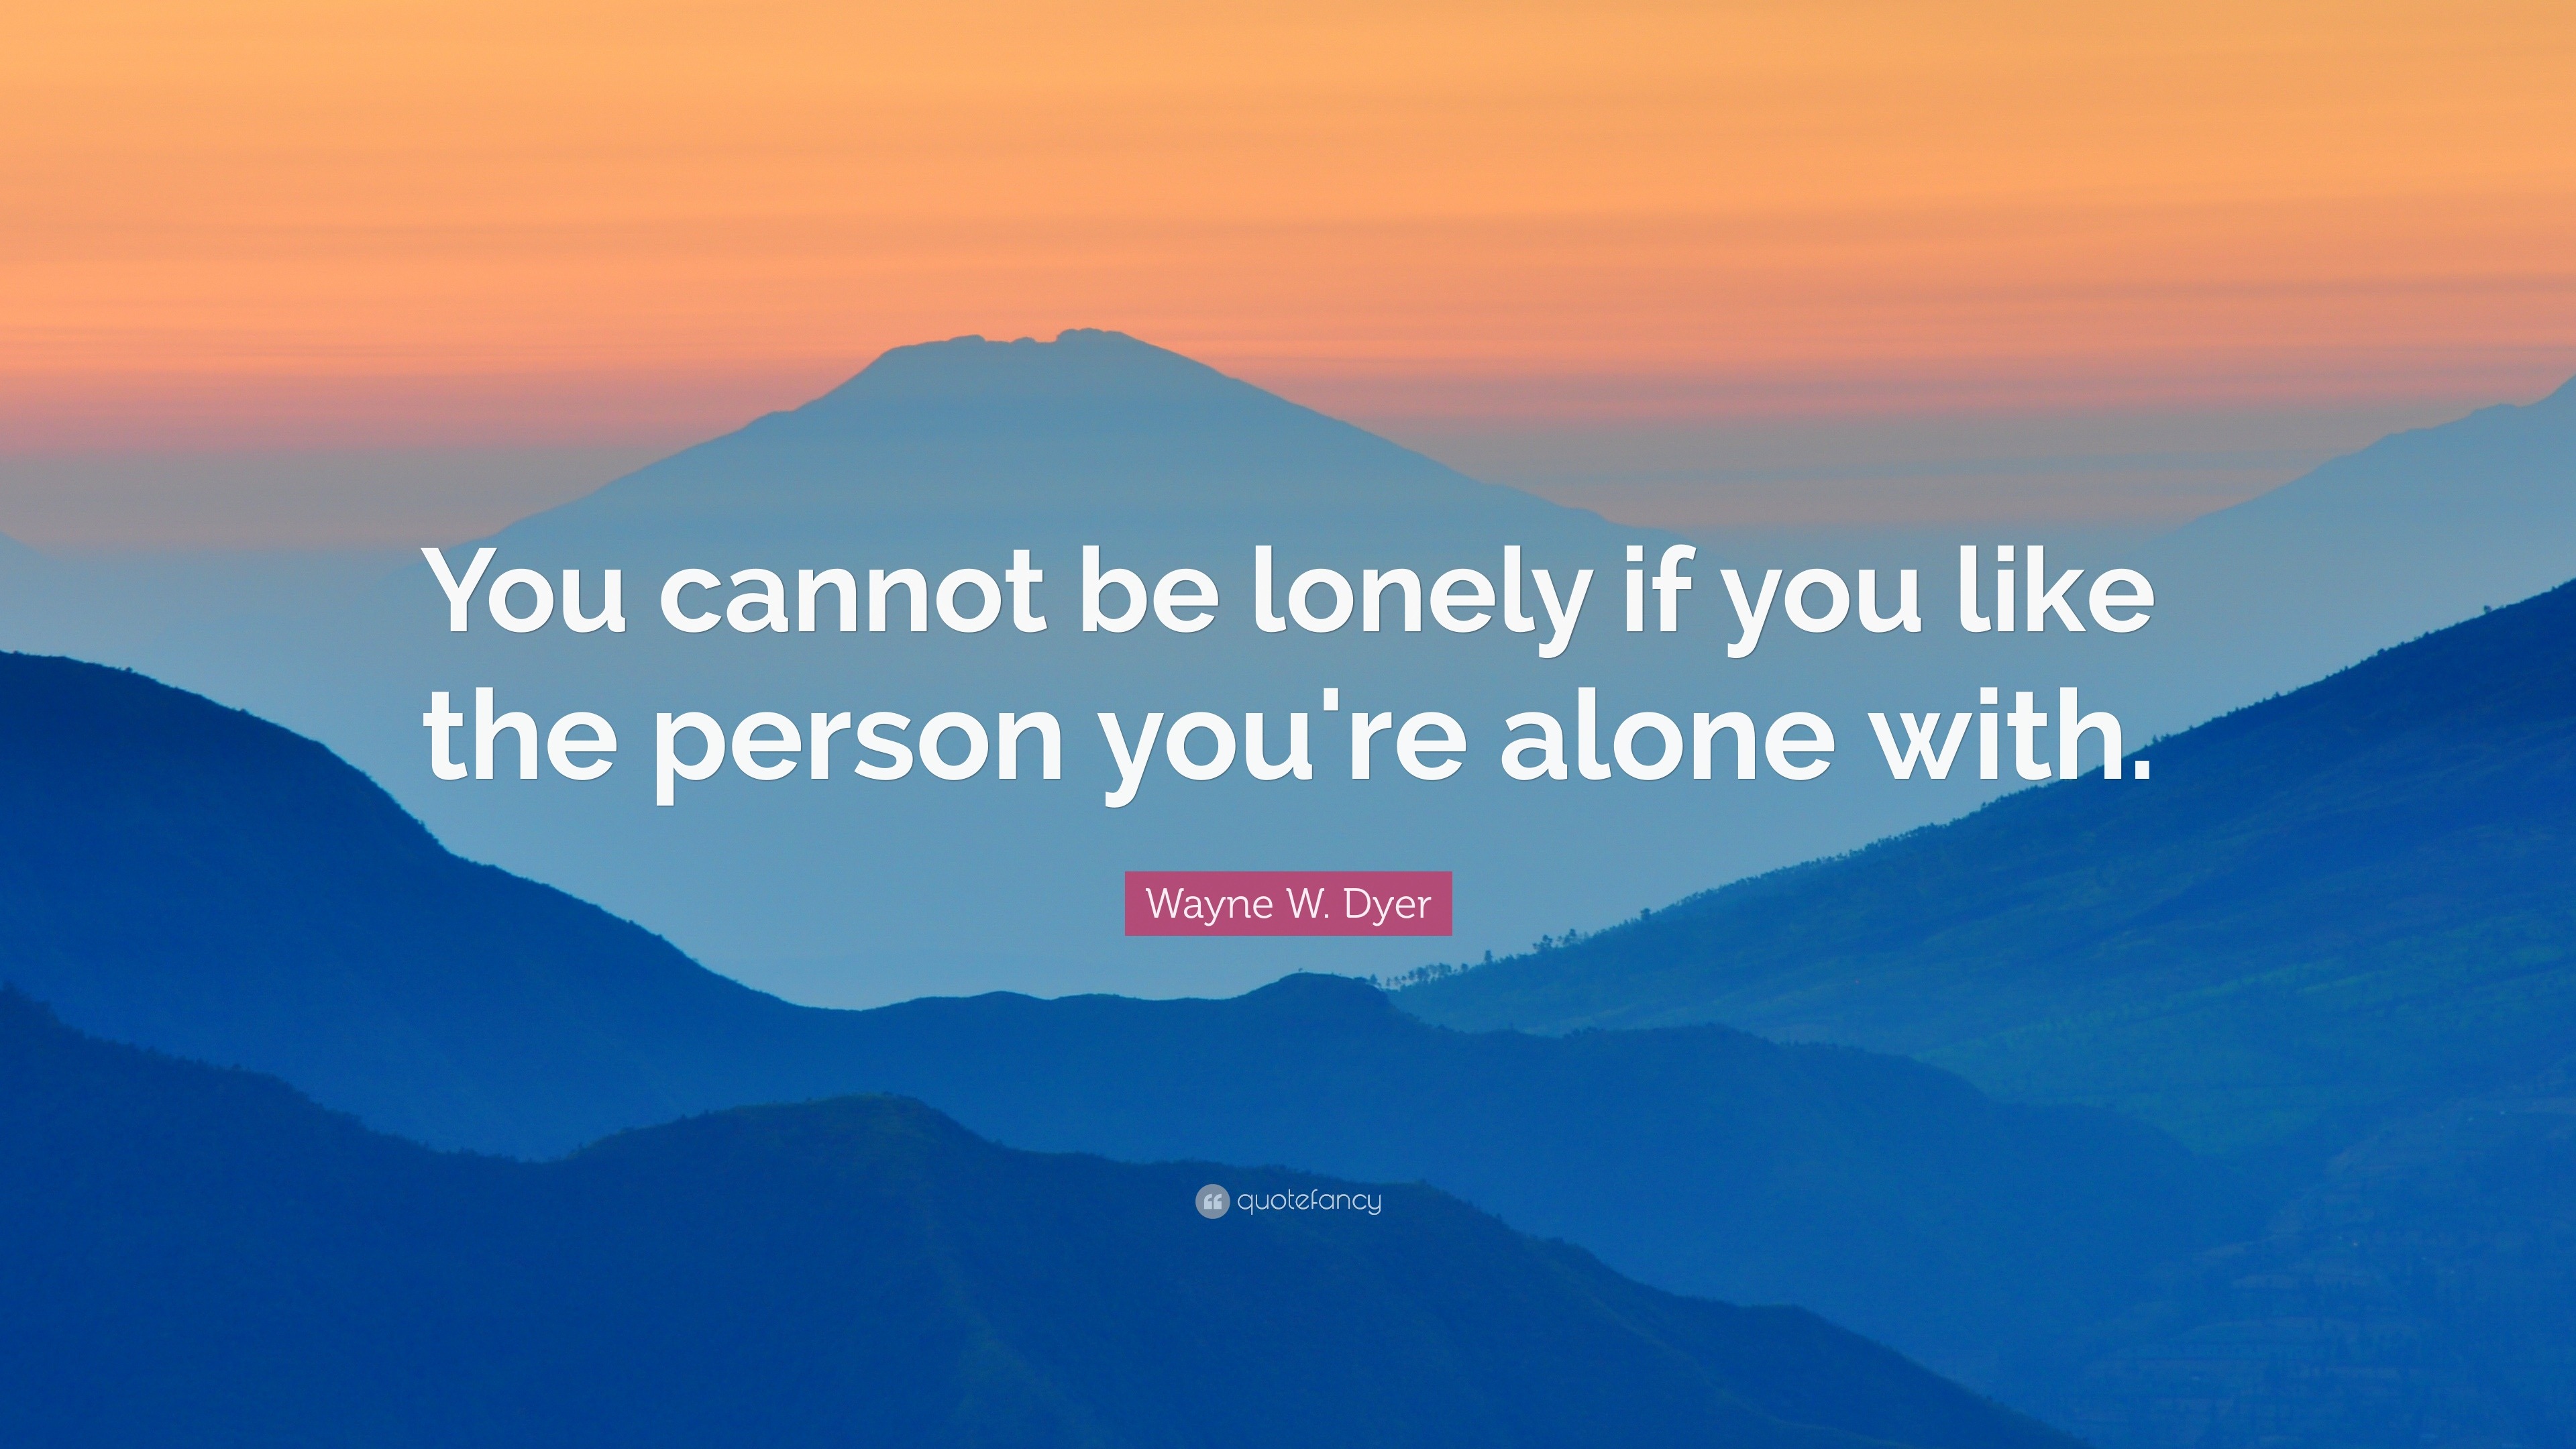 Wayne W. Dyer Quote: “You cannot be lonely if you like the person you ...